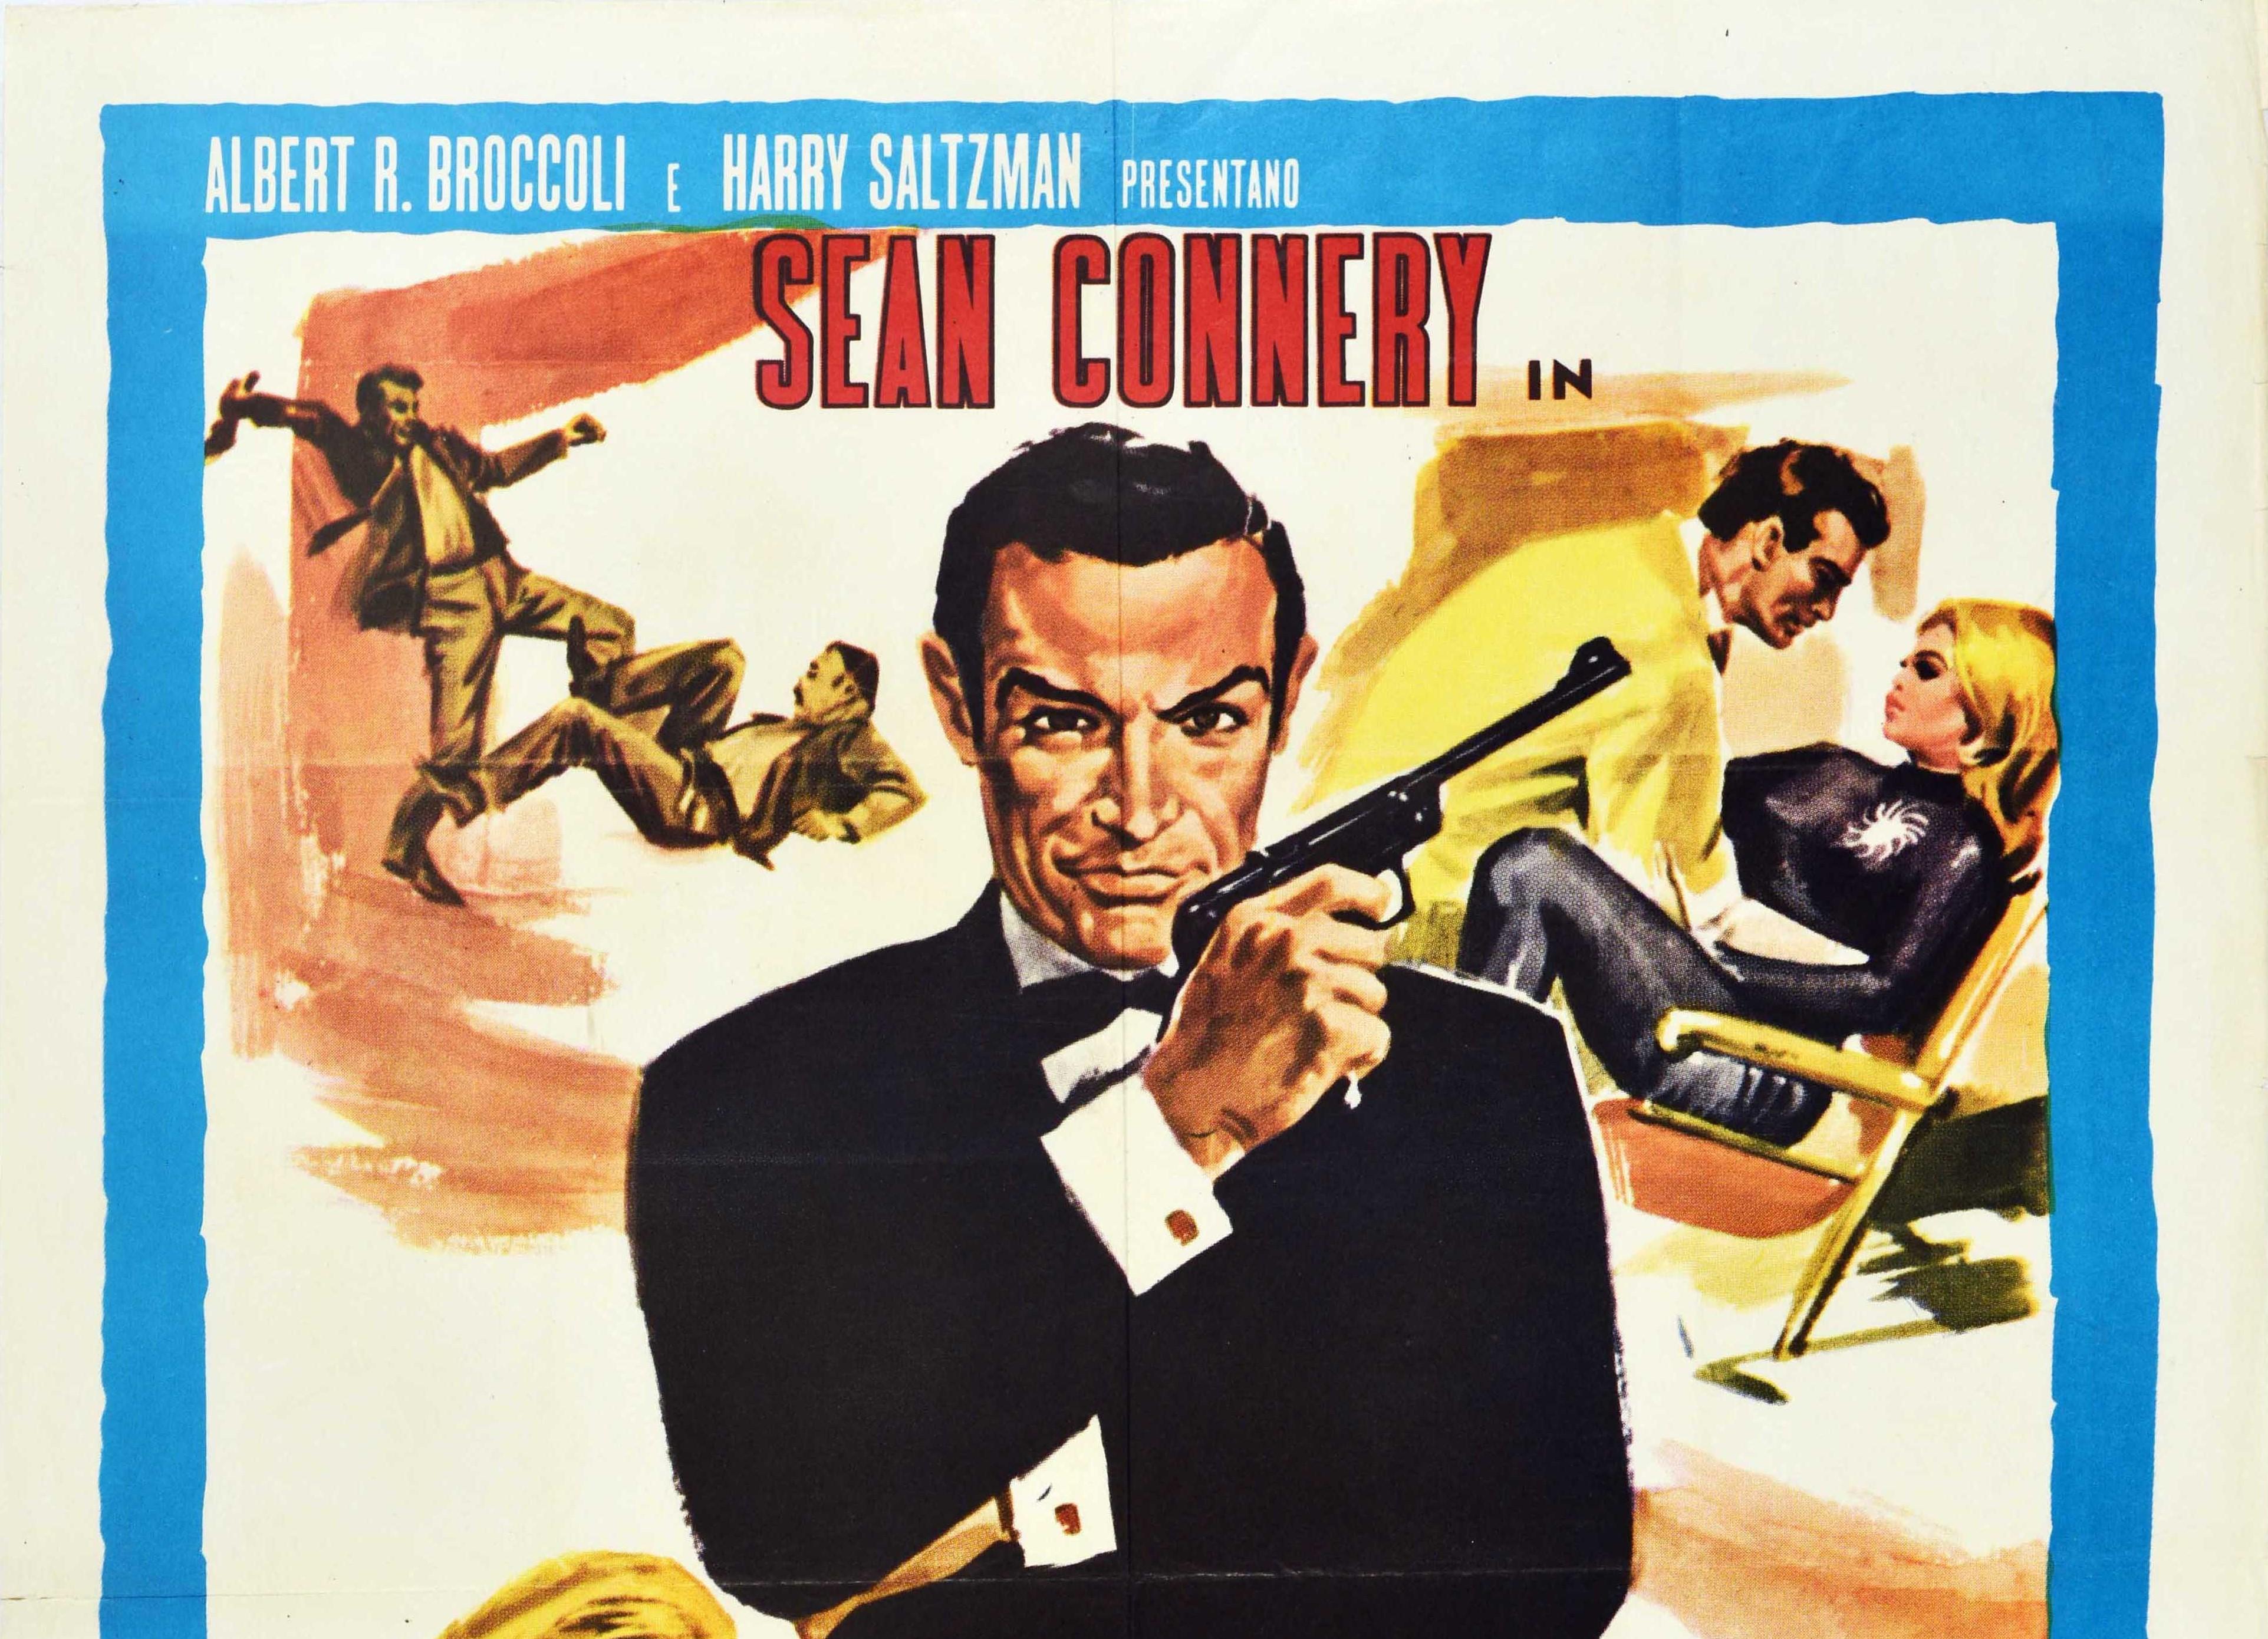 Original vintage 007 movie poster for the Italian re-release of the classic British spy thriller Goldfinger (the third film in the James Bond film series) directed by Guy Hamilton and starring Sean Connery with Honor Blackman as Bond Girl Pussy